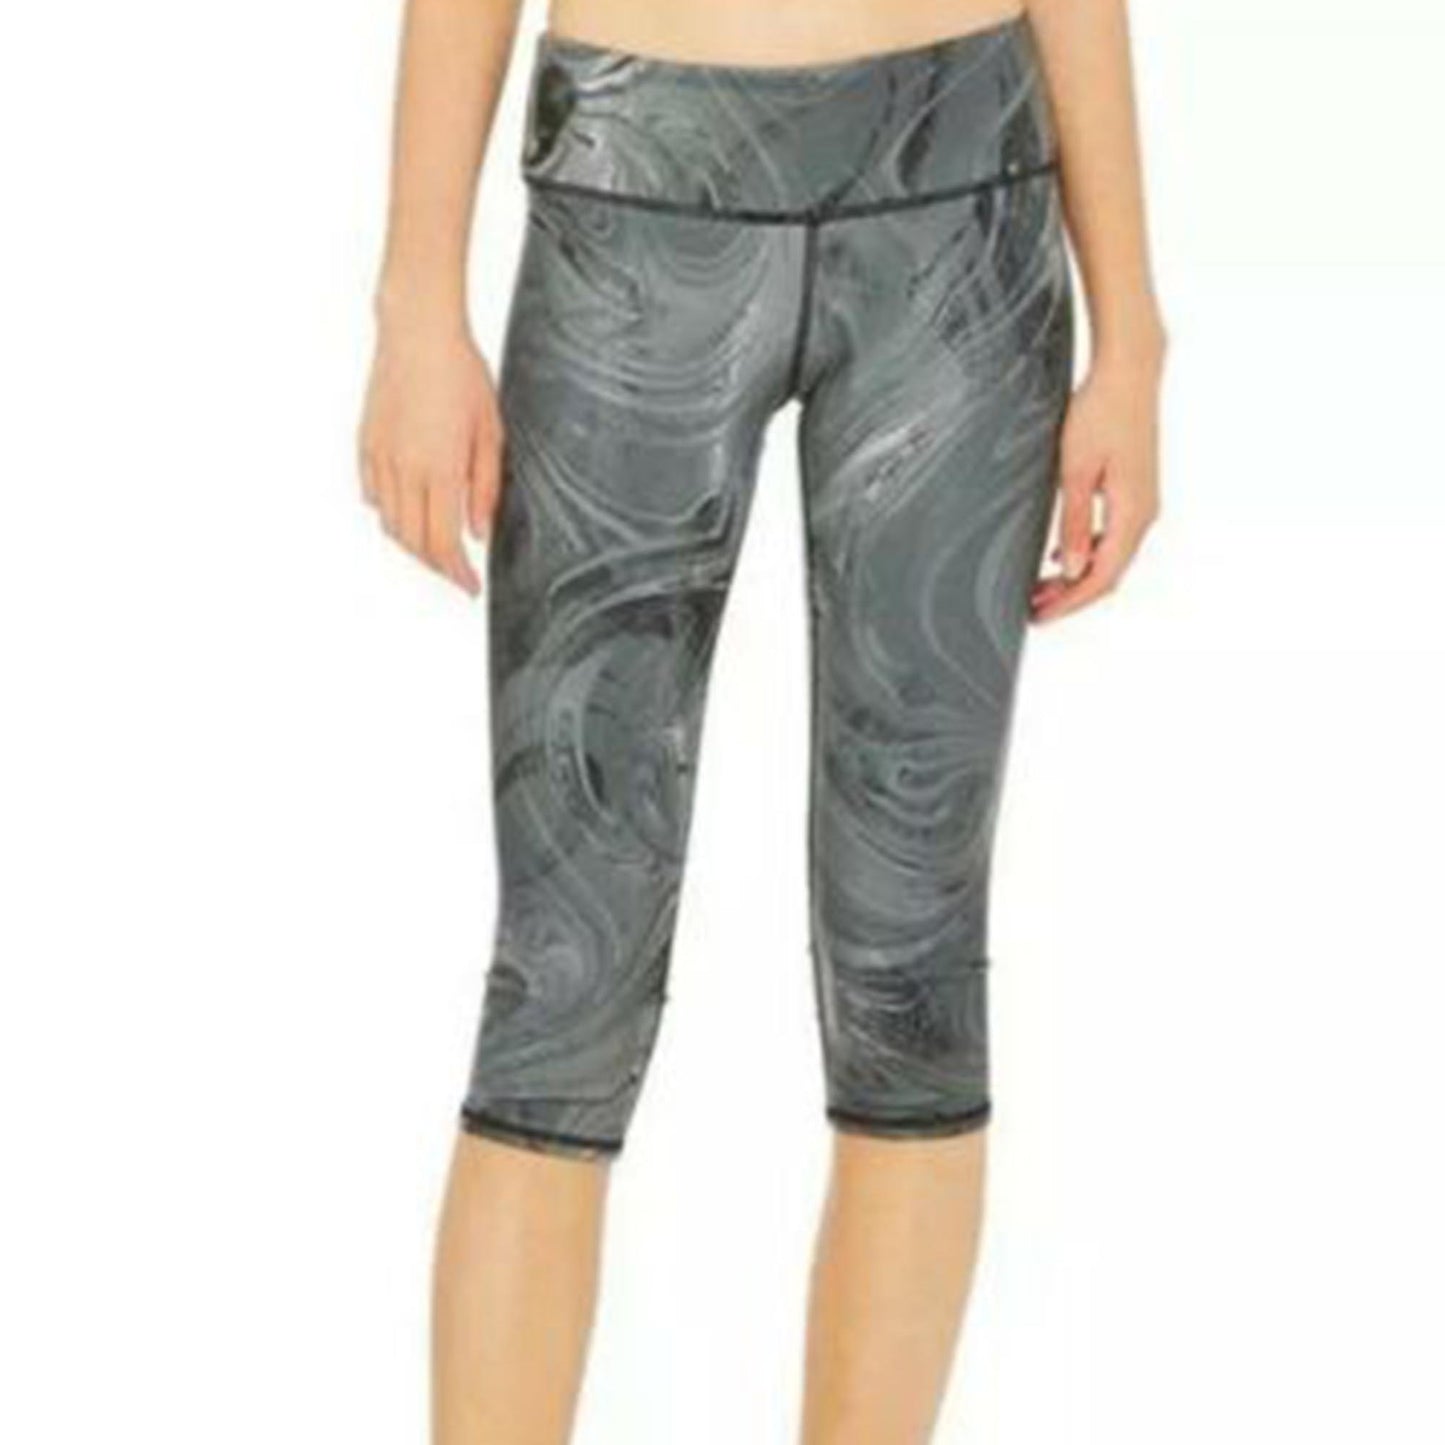 alo yoga airbrush cropped leggings in black marble - size 6